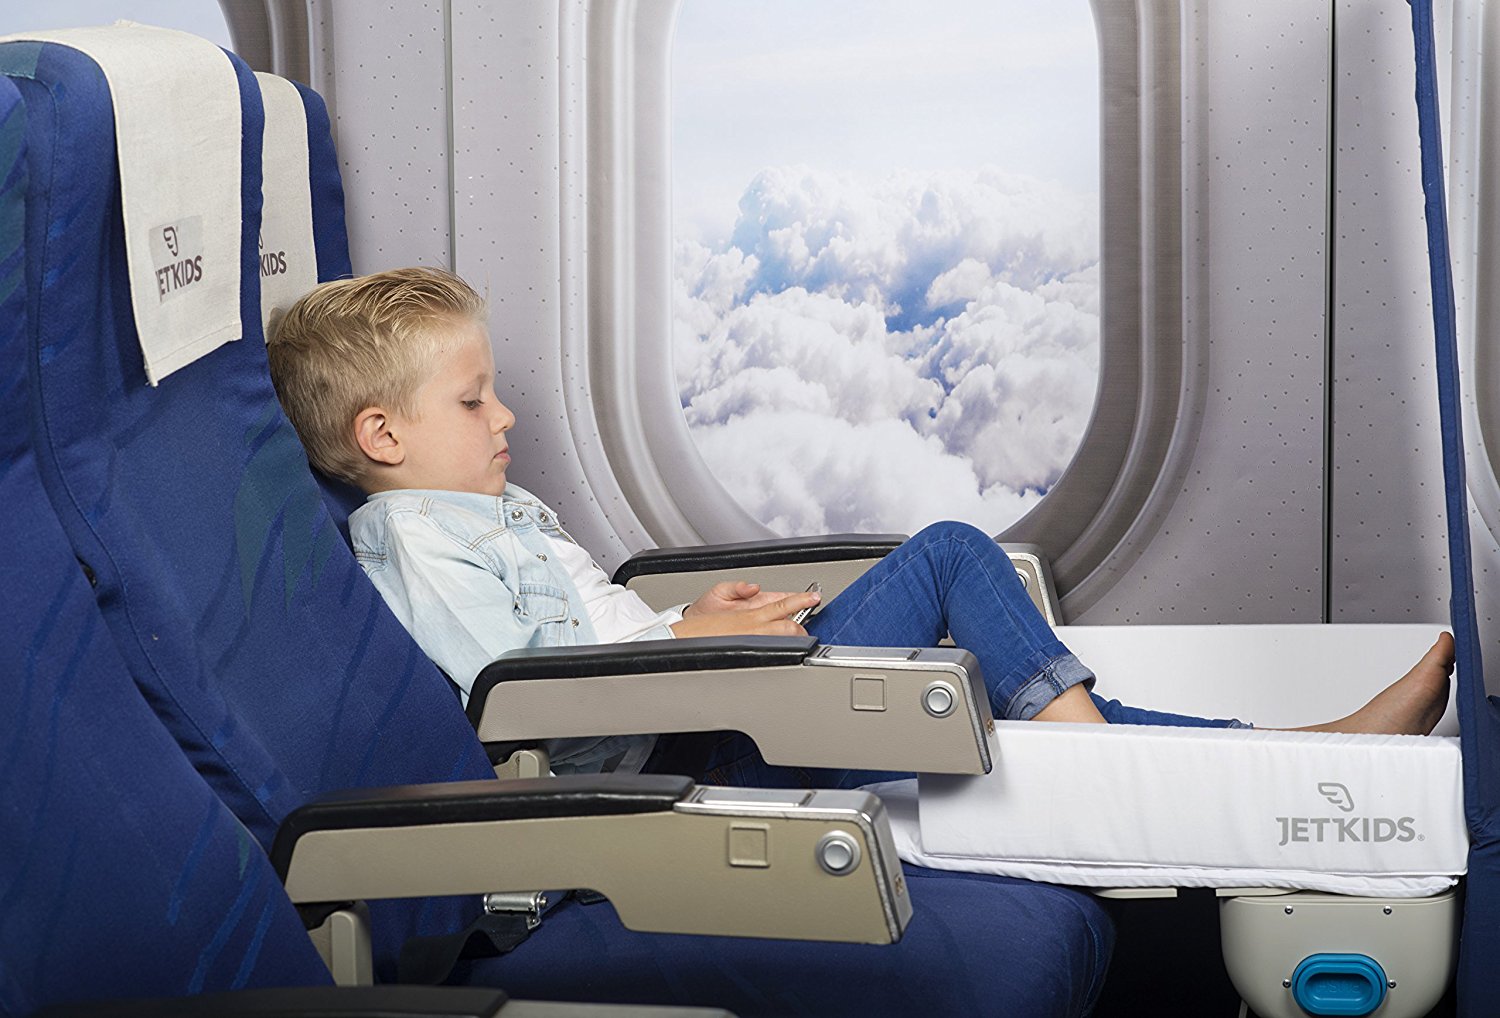 air travel accessories for toddlers